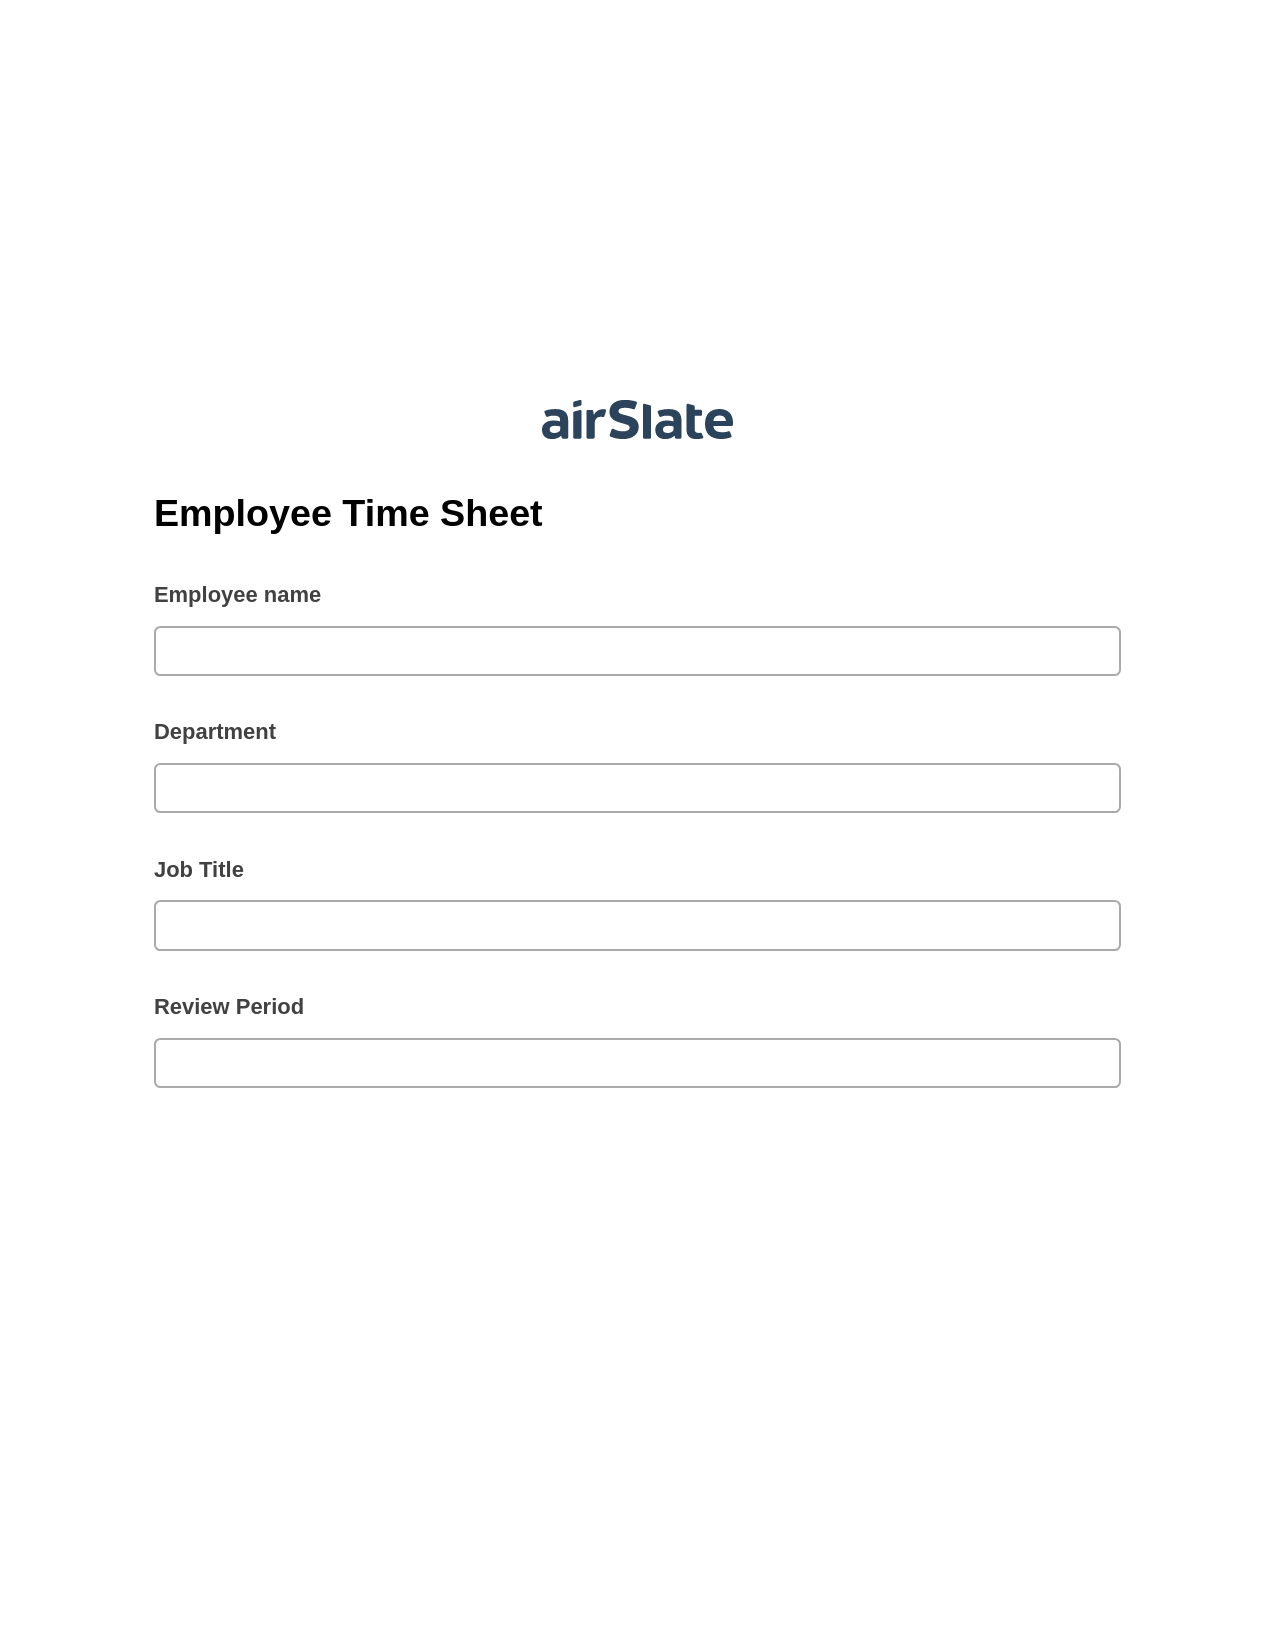 Multirole Employee Time Sheet Pre-fill from Salesforce Records with SOQL Bot, Update Audit Trail Bot, Export to Smartsheet